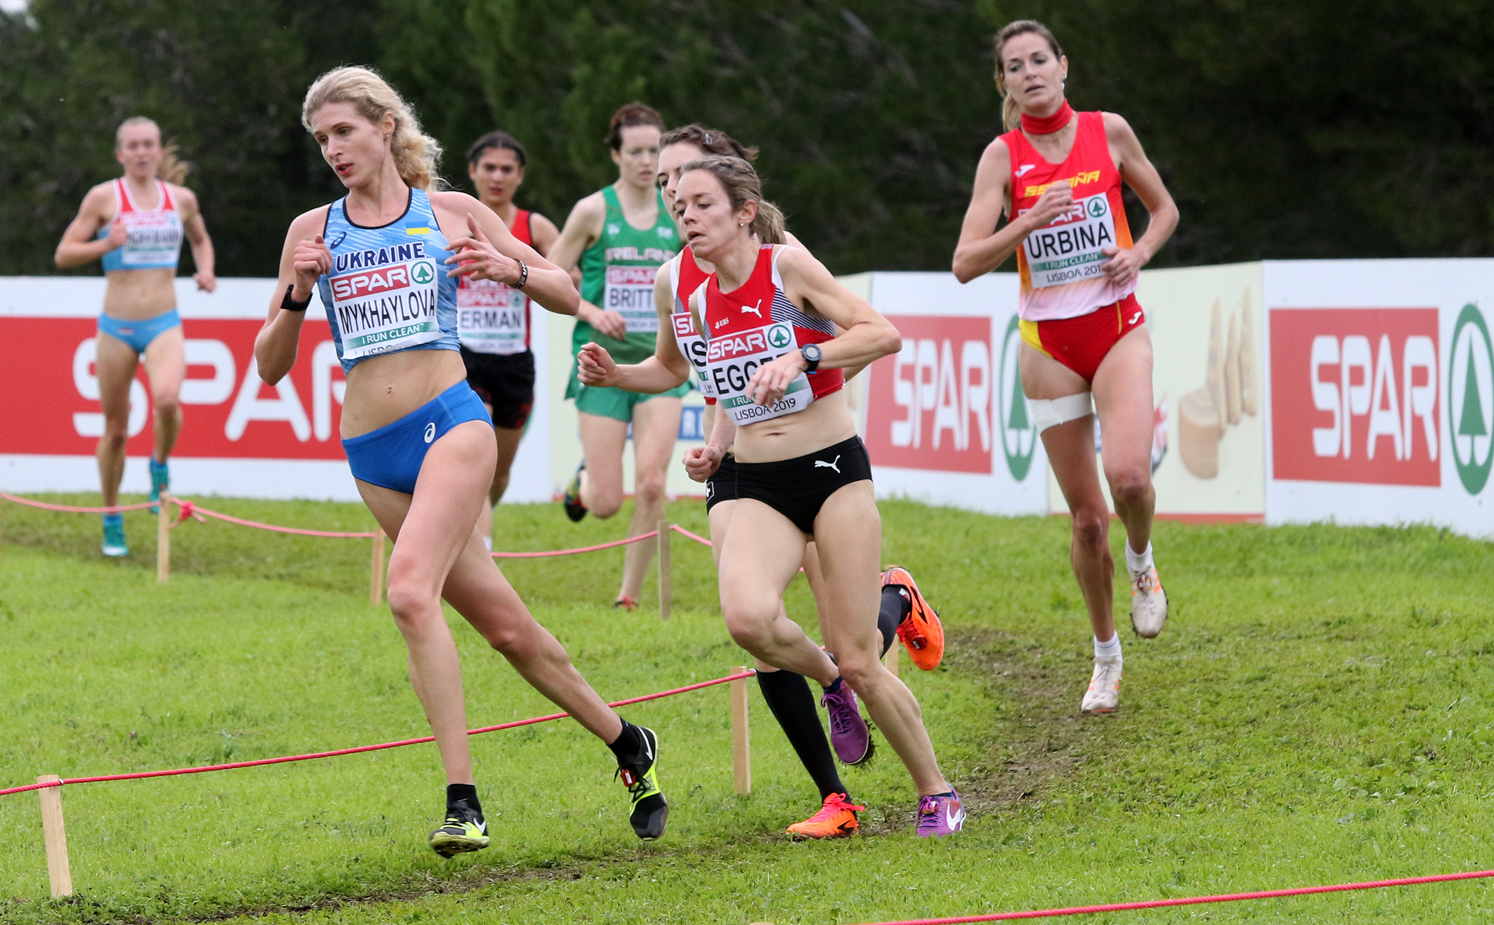 Record numbers from SPAR European Cross Country Championships in Lisbon